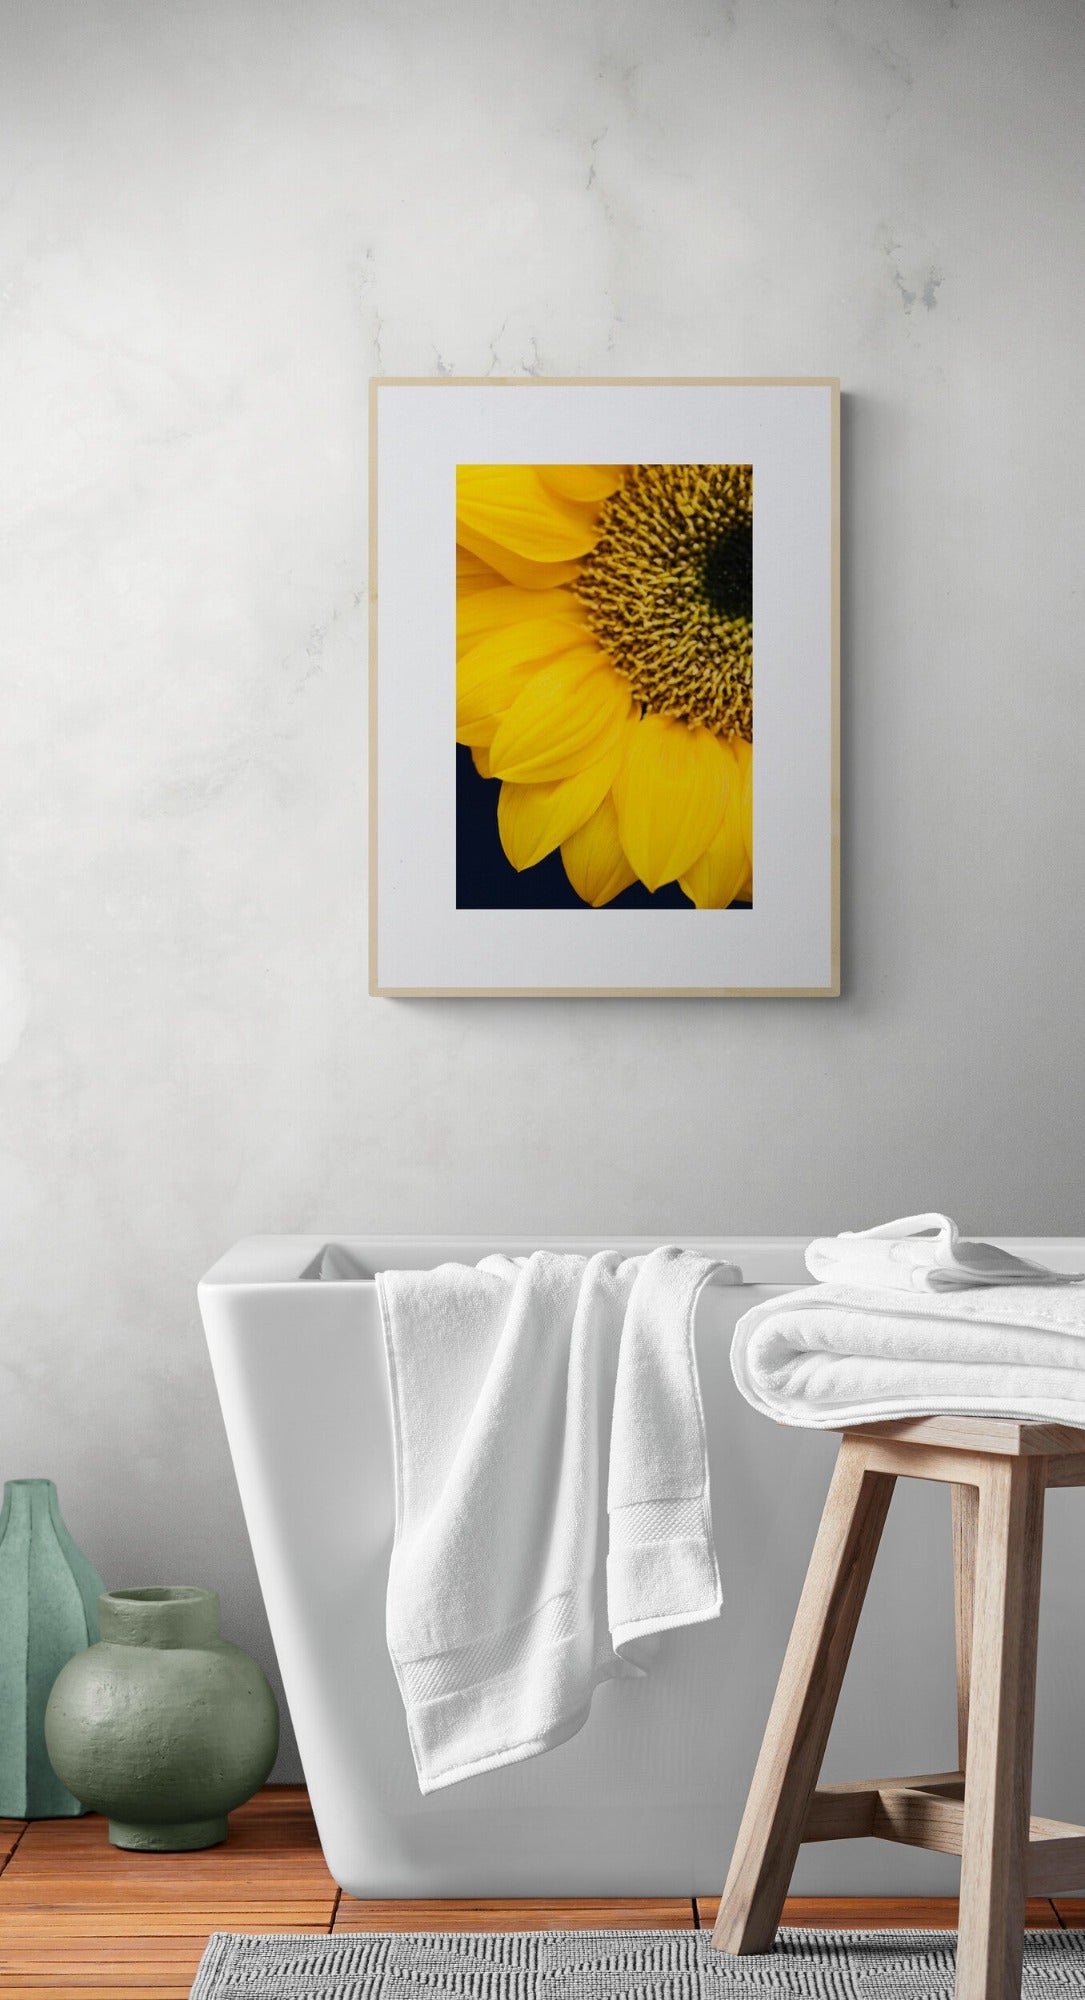 Abstract Close Up Photograph of a Sunflower as Wall Art in a Bathroom